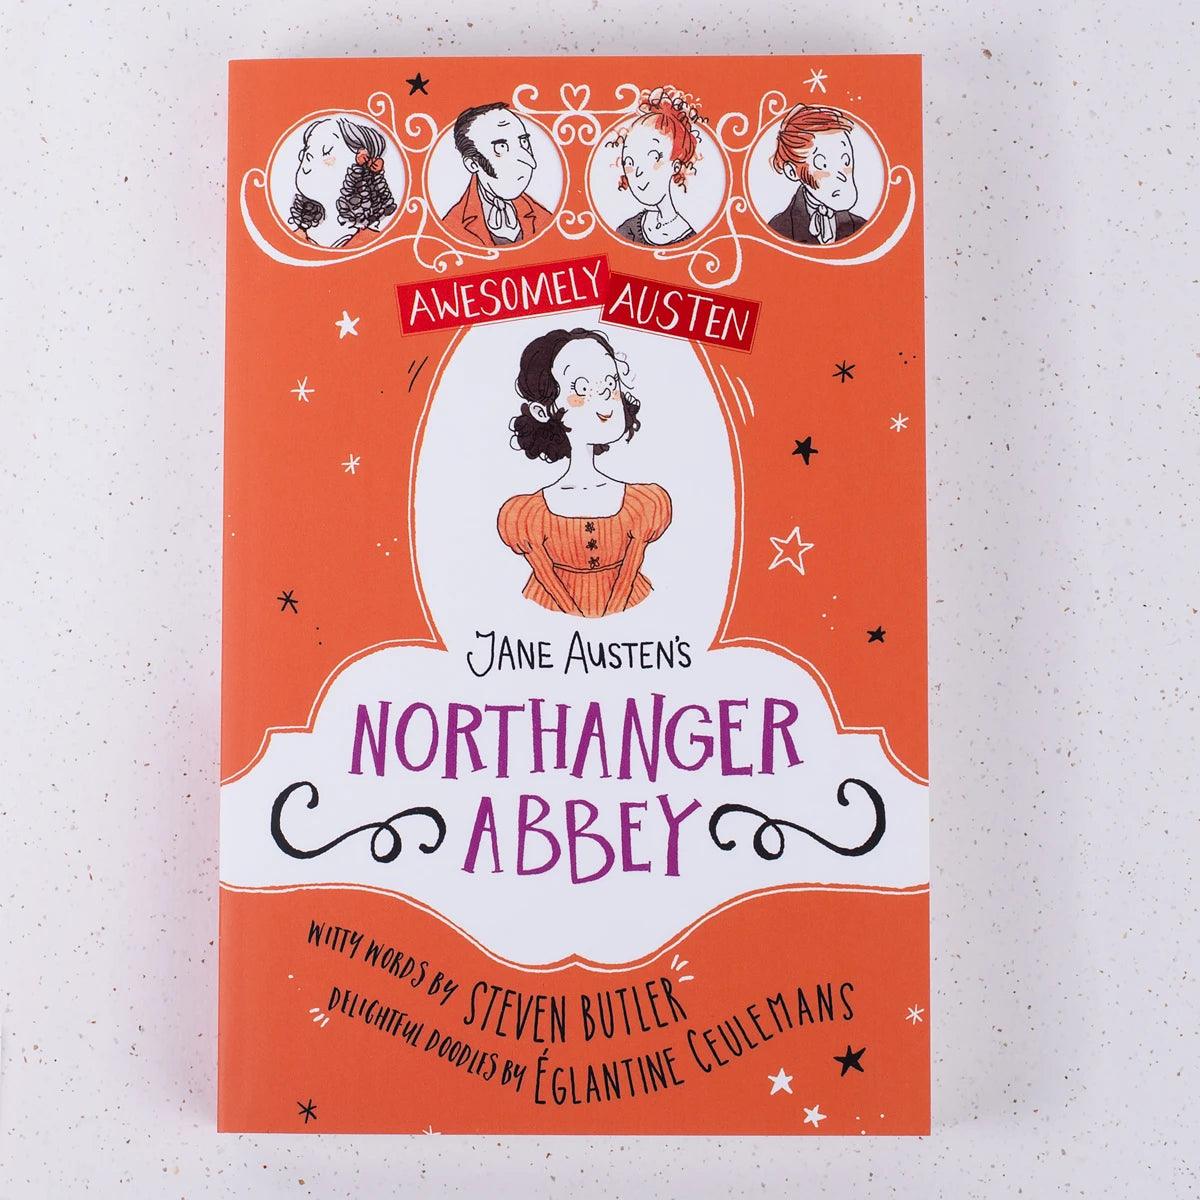 Jane Austen's Northanger Abbey-Awesomely Austen Retold & Illustrated